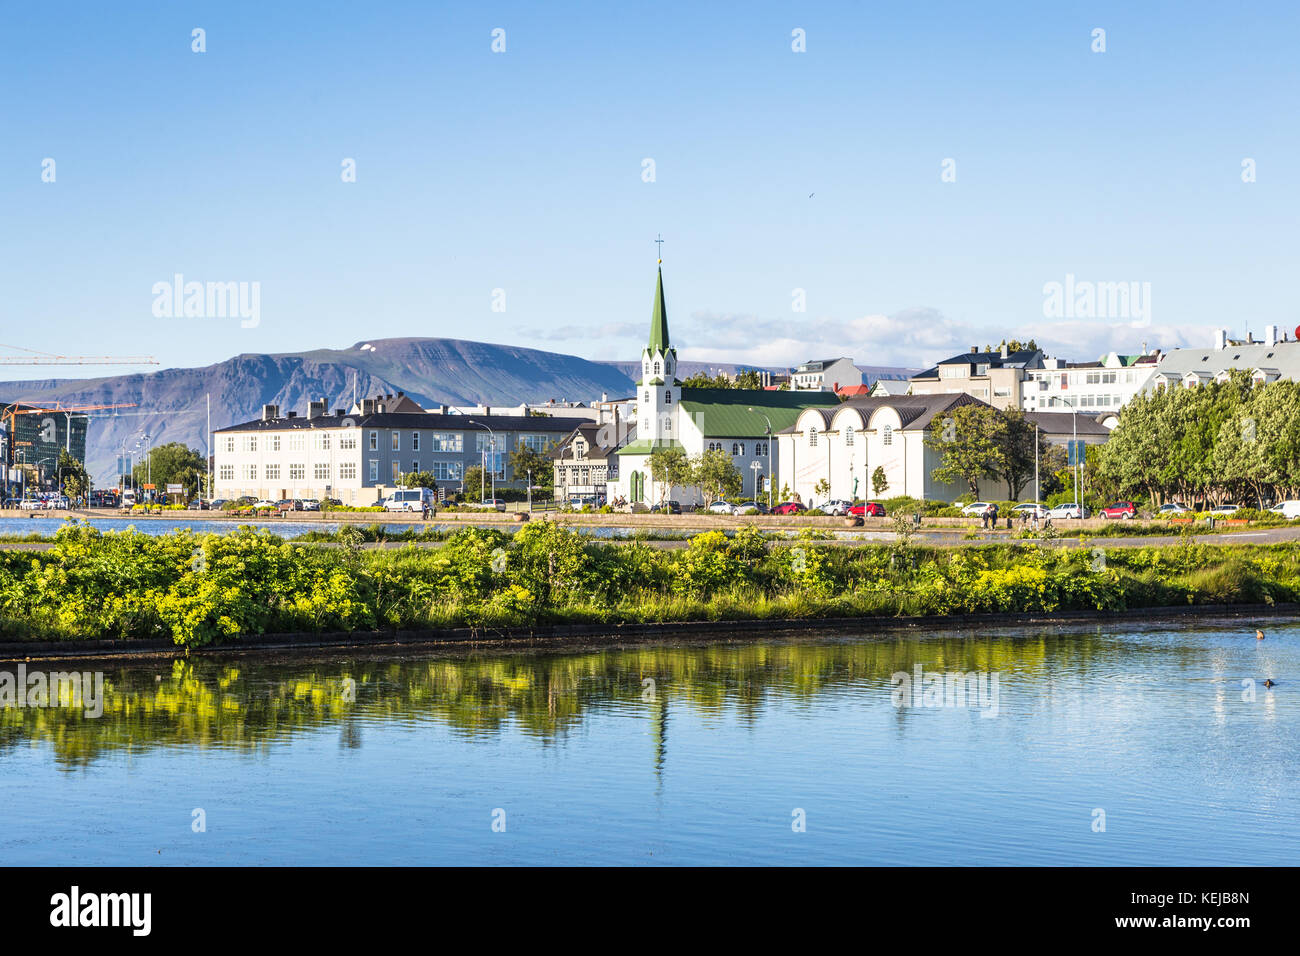 Reykjavik cityscape viewed from across the Tjornin lake in the heart of Iceland capital city on a sunny summer day. Stock Photo